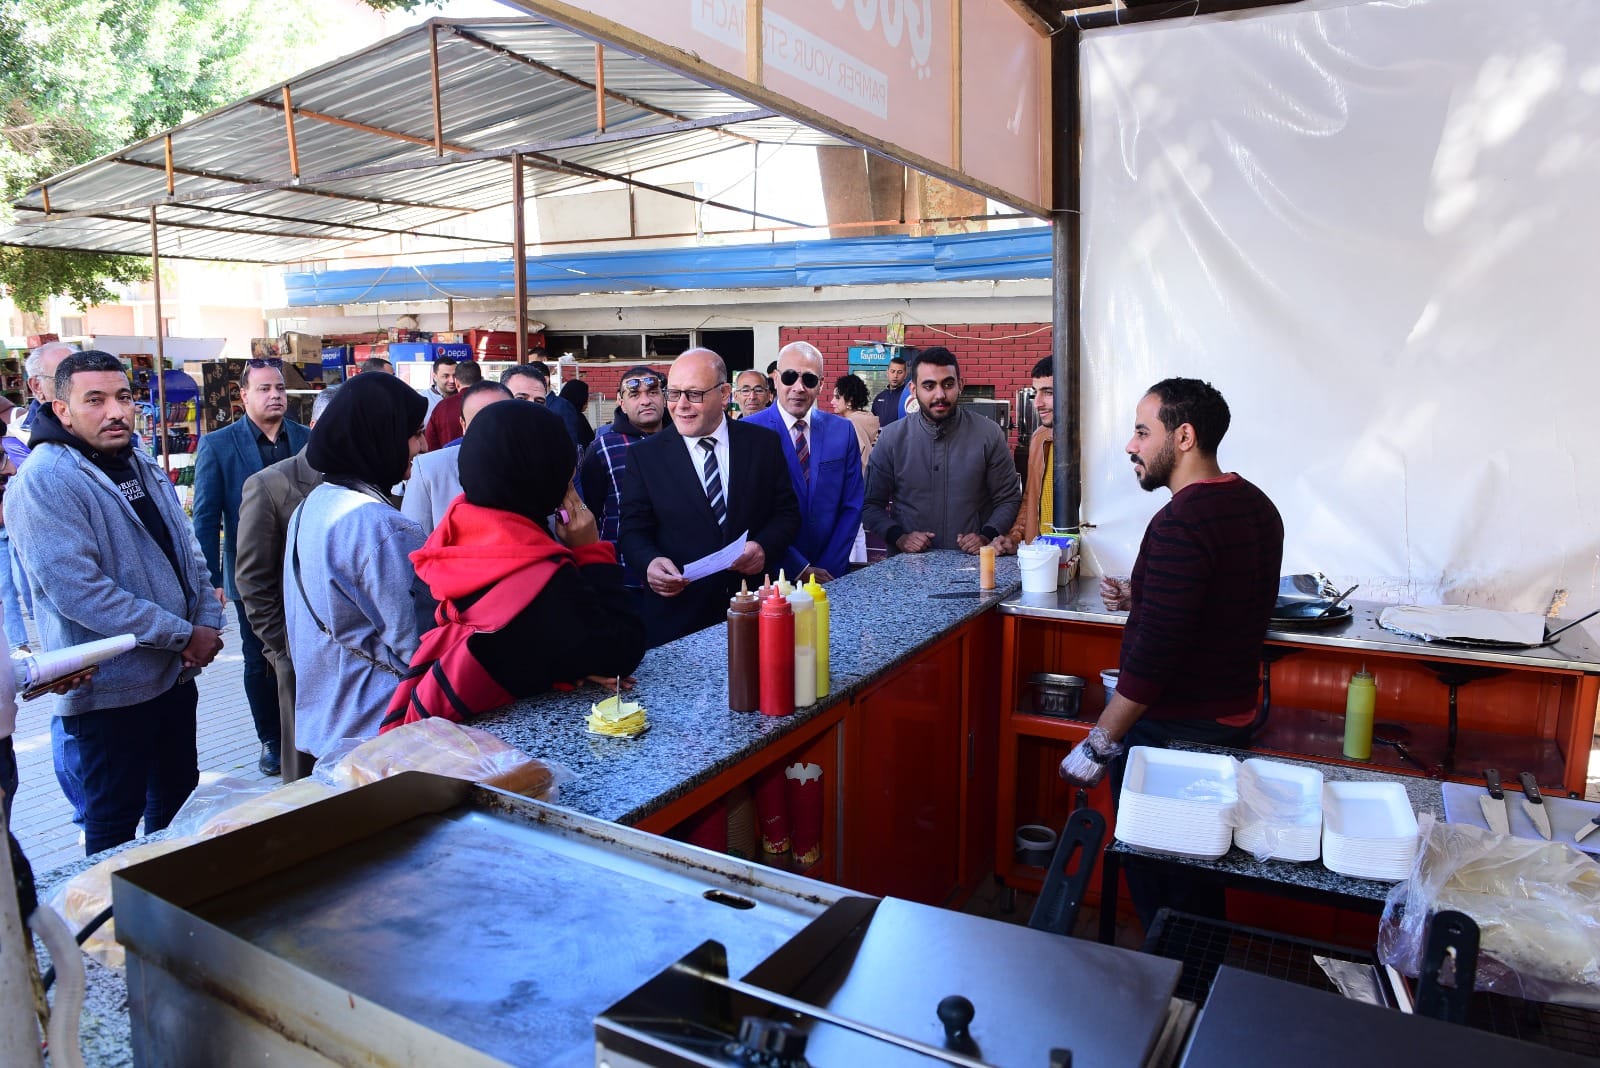 Sohag University President ensures the Quality of the Food provided in the University Cafeteria and meets with Students to determine the Extent of their Satisfaction with the Service Provided.